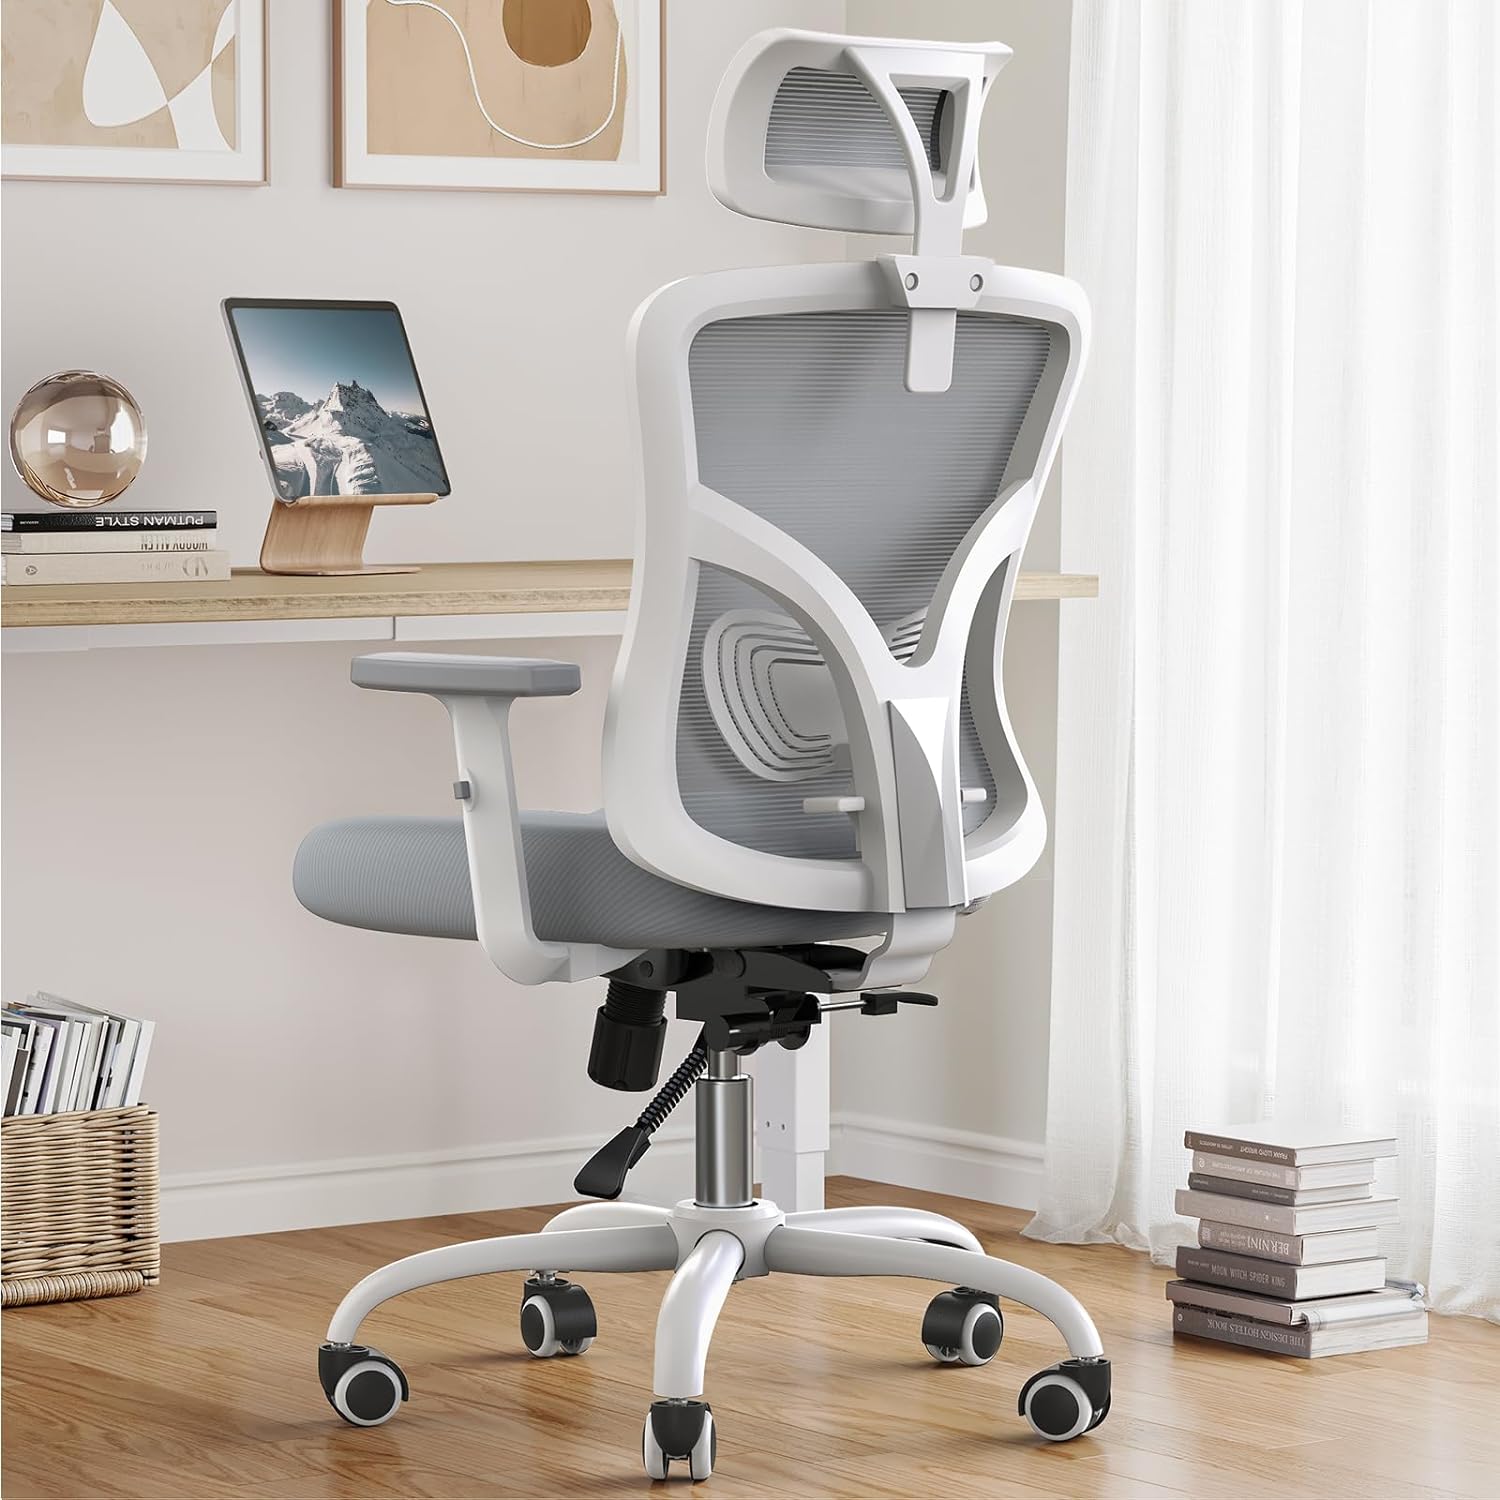 NOBLEWELL Ergonomic Office Chair, Desk Chair with 2'' Adjustable Lumbar Support, Headrest, 2D Armrest, Office Chair Backrest 135° Freely Locking and Rocking, Computer Chair for Home Office